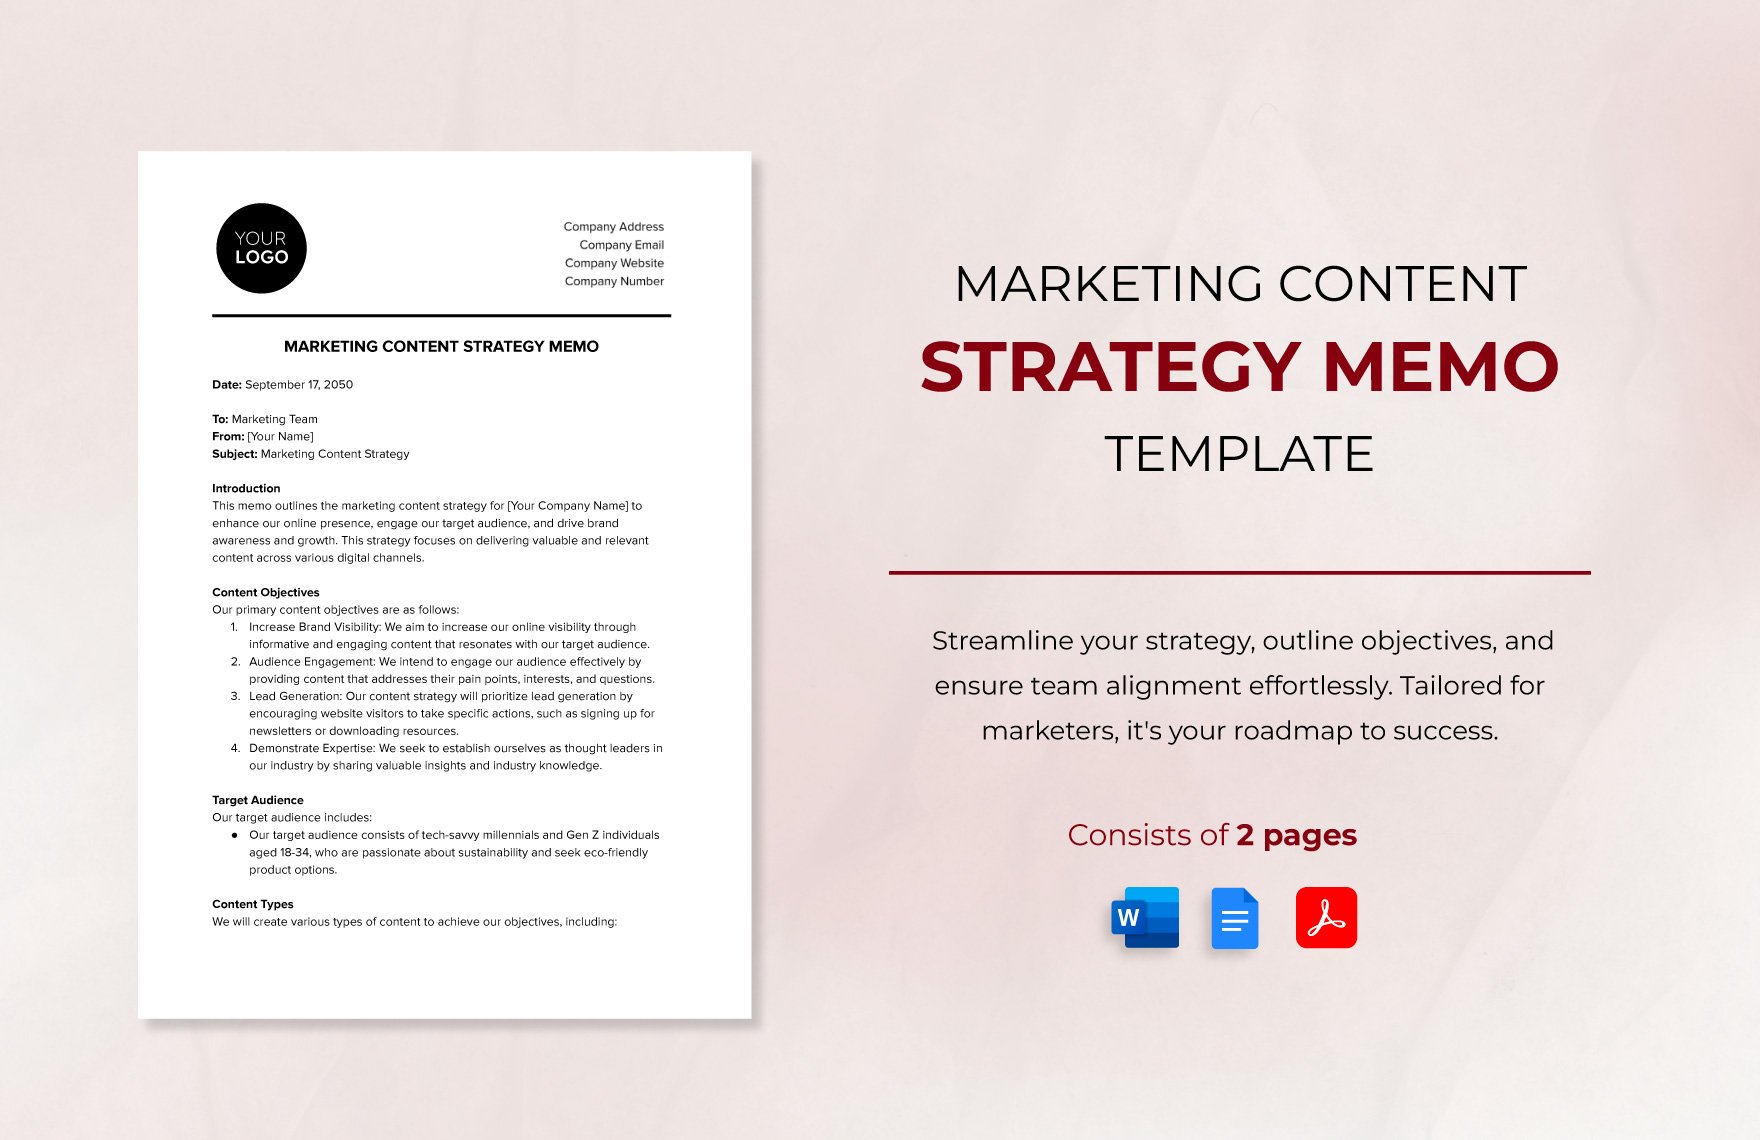 Marketing Content Strategy Memo Template in Word, Google Docs, PDF